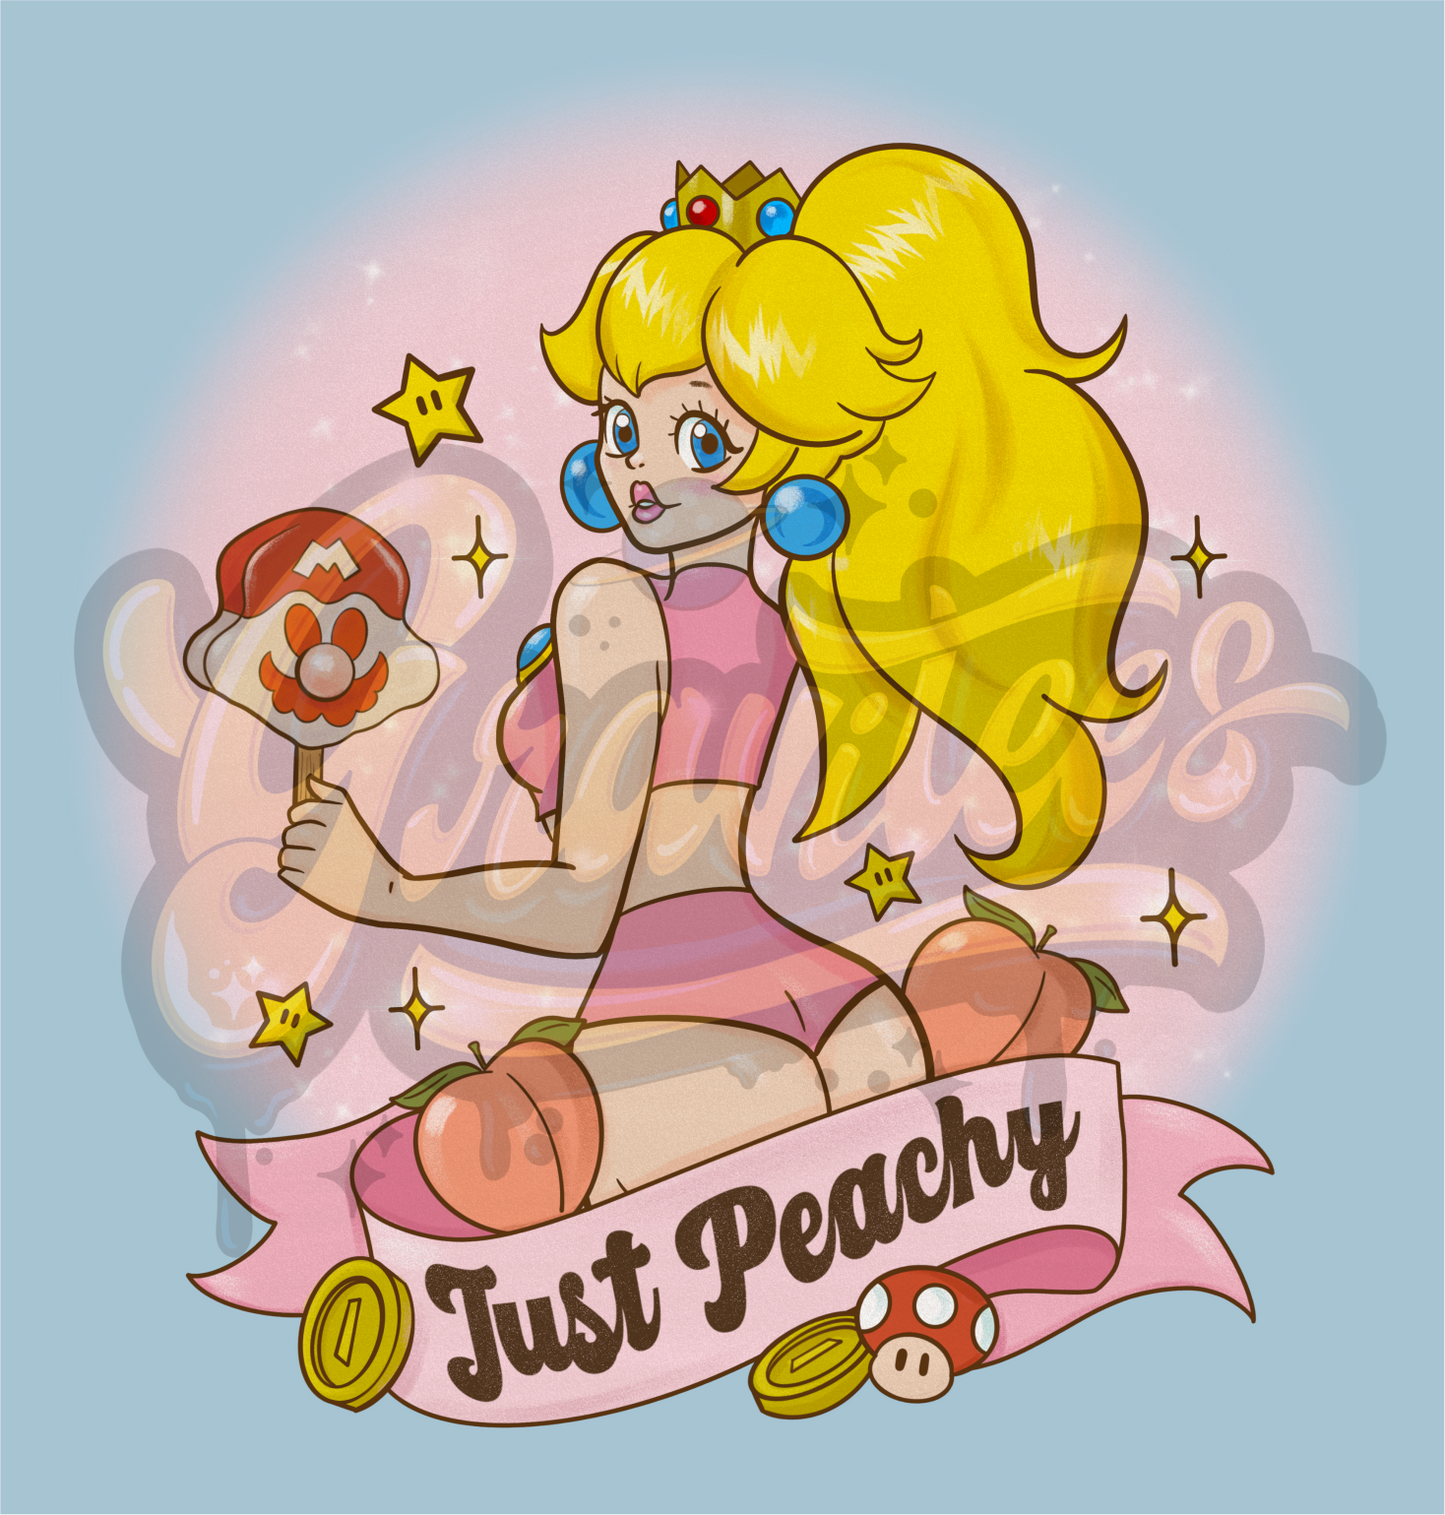 Just Peachy PNG, Gamer Clipart, Princess Clipart for DTF or Shirt Printing, PNG Only!